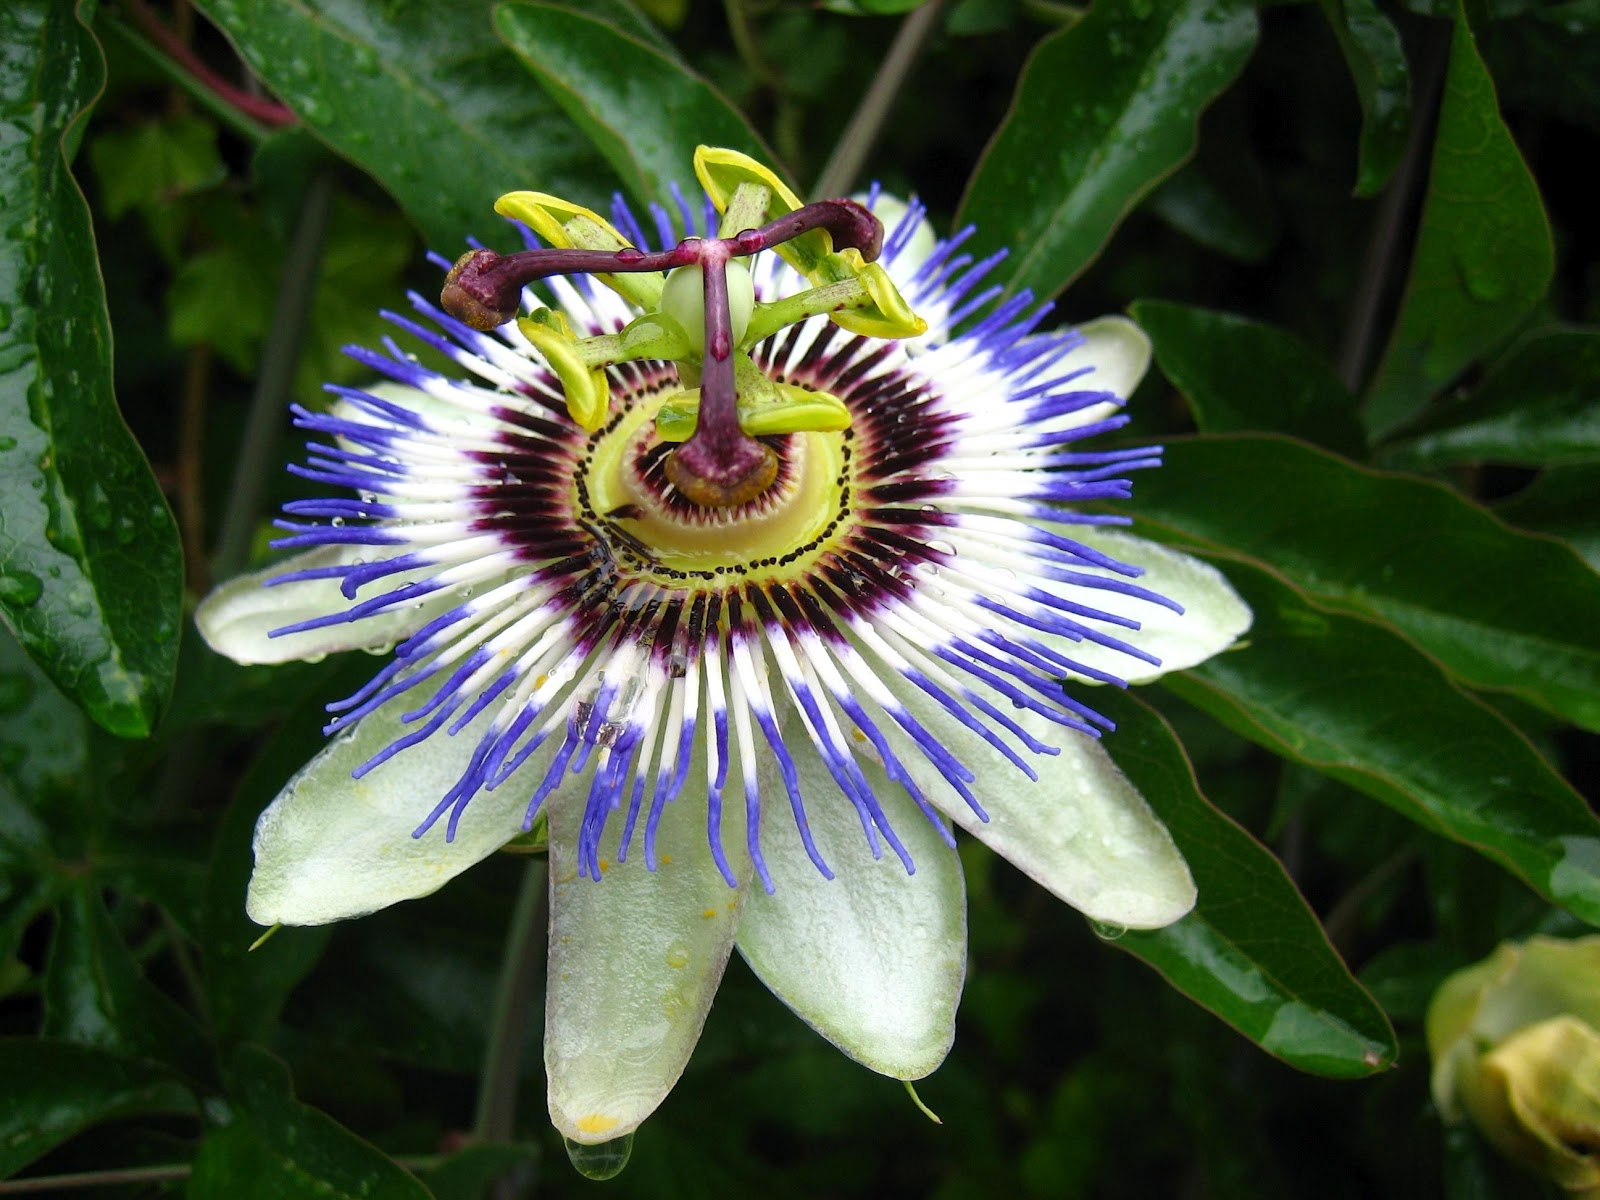 FLOWERS OF THE BLUE PLANET: EXOTIC FLOWERS